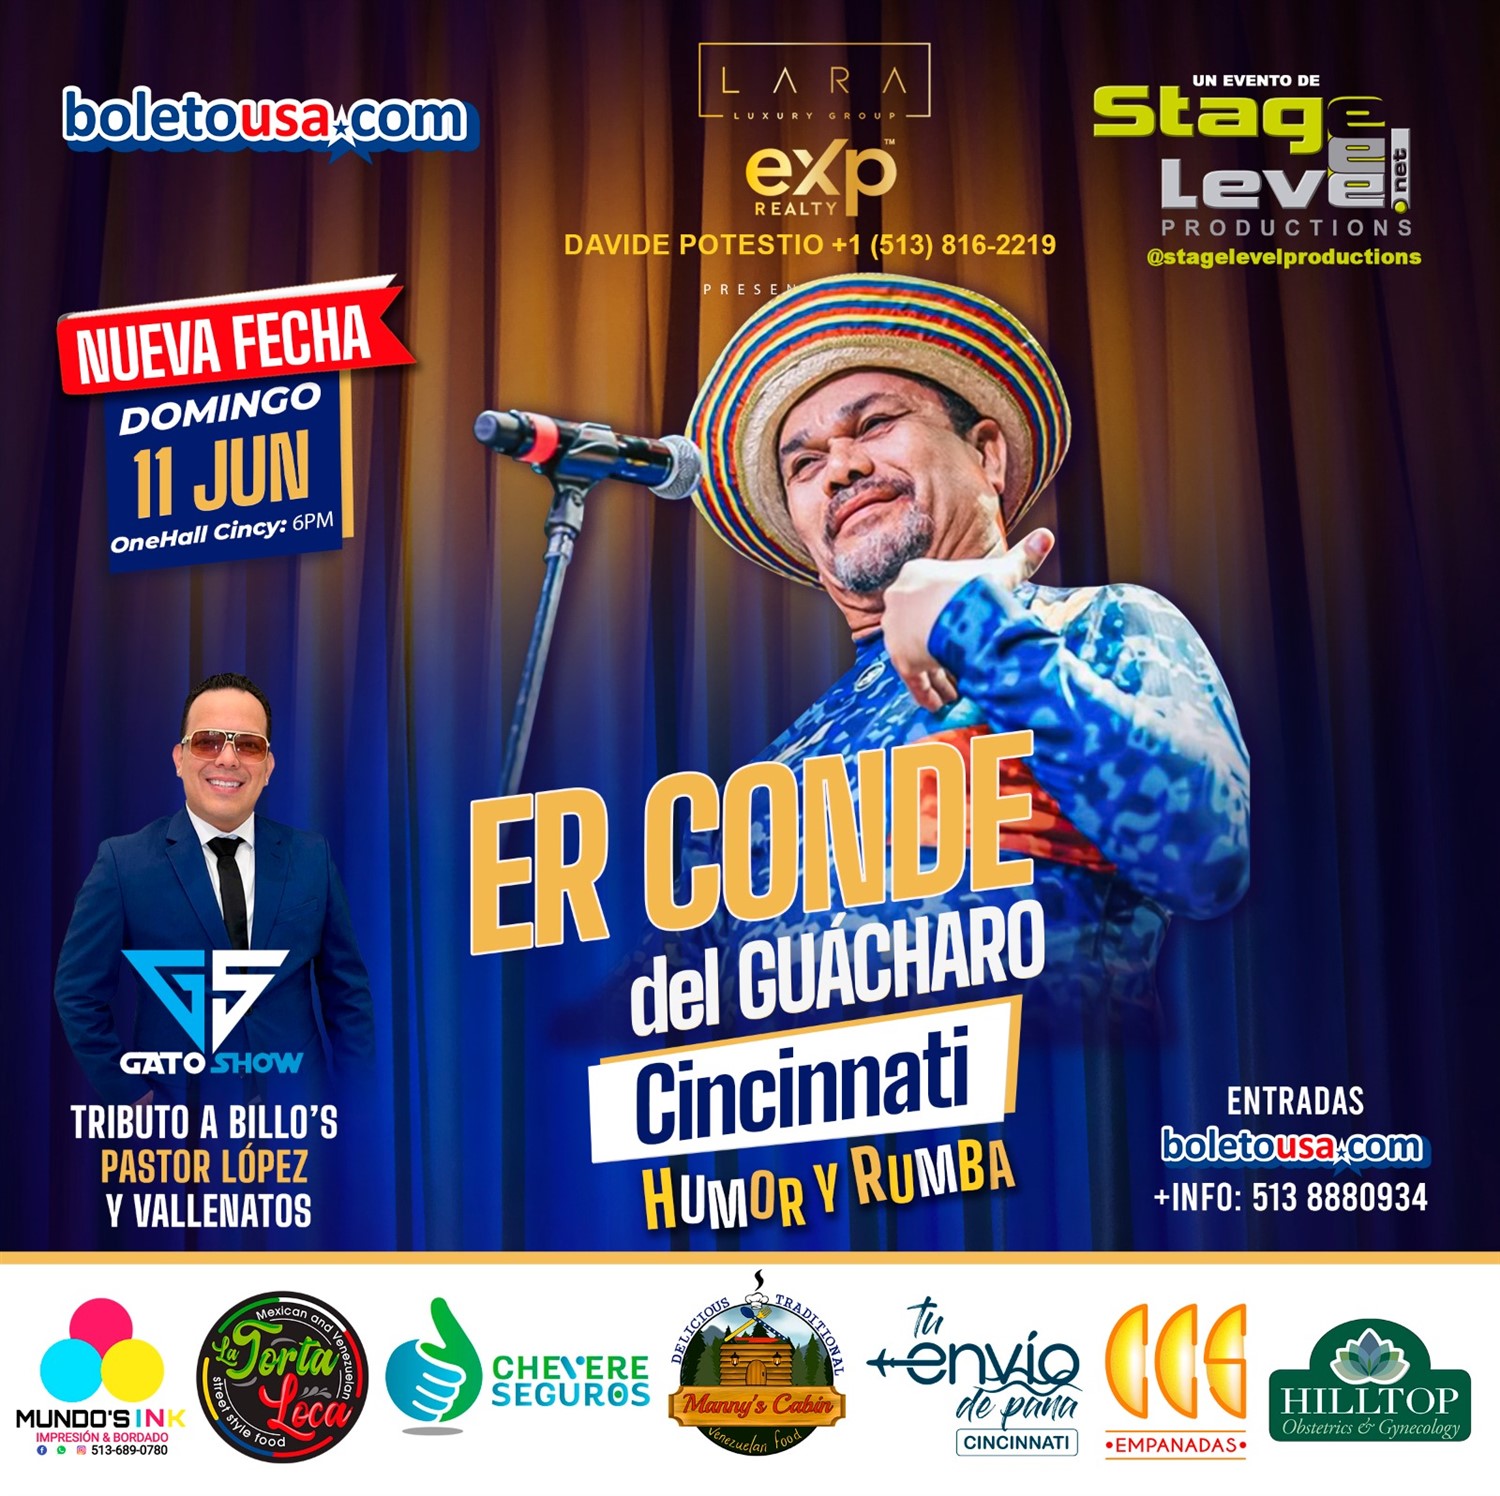 Er Conde del Guacharo - GATO SHOW Tributo Billo´s, Pastor Lopez y Vallenatos C I N C I N N A T I on Apr 23, 18:00@OneHall Cincy - Pick a seat, Buy tickets and Get information on stagelevel.net stagelevel.net